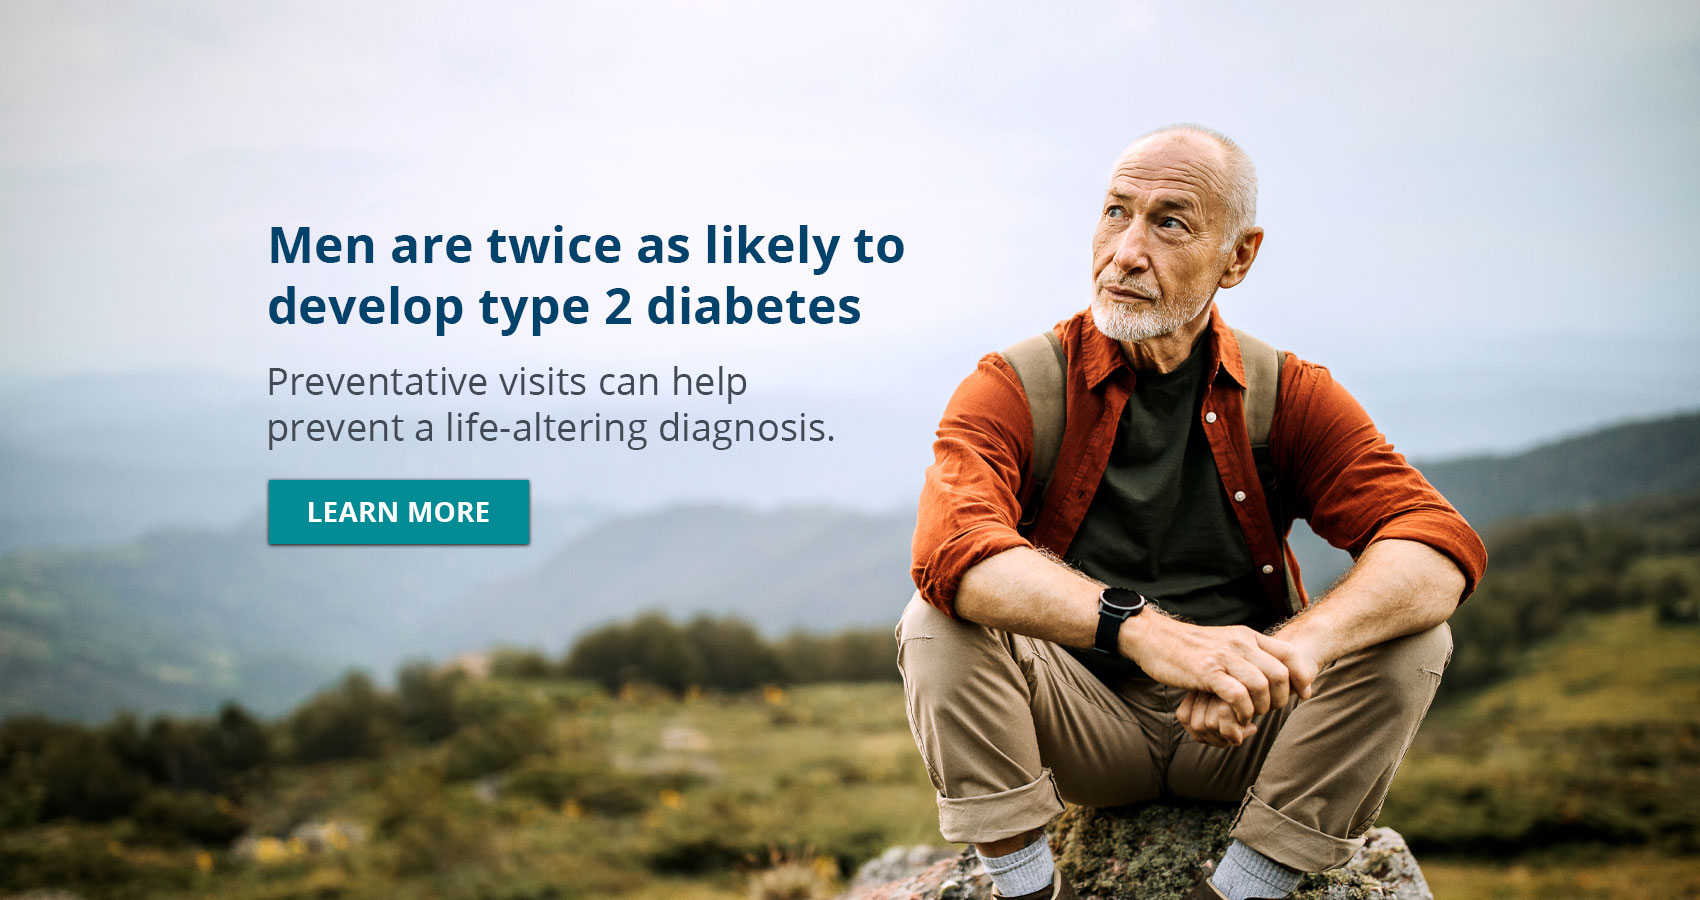 Banner picture of a man sitting on a rock looking out in the distance. There is mountains around him. Banner says:

Men are twice as likely to develop  type 2 diabetes
Preventatives visits can help prevent a life-altering diagnosis.

(LEARN MORE) Link